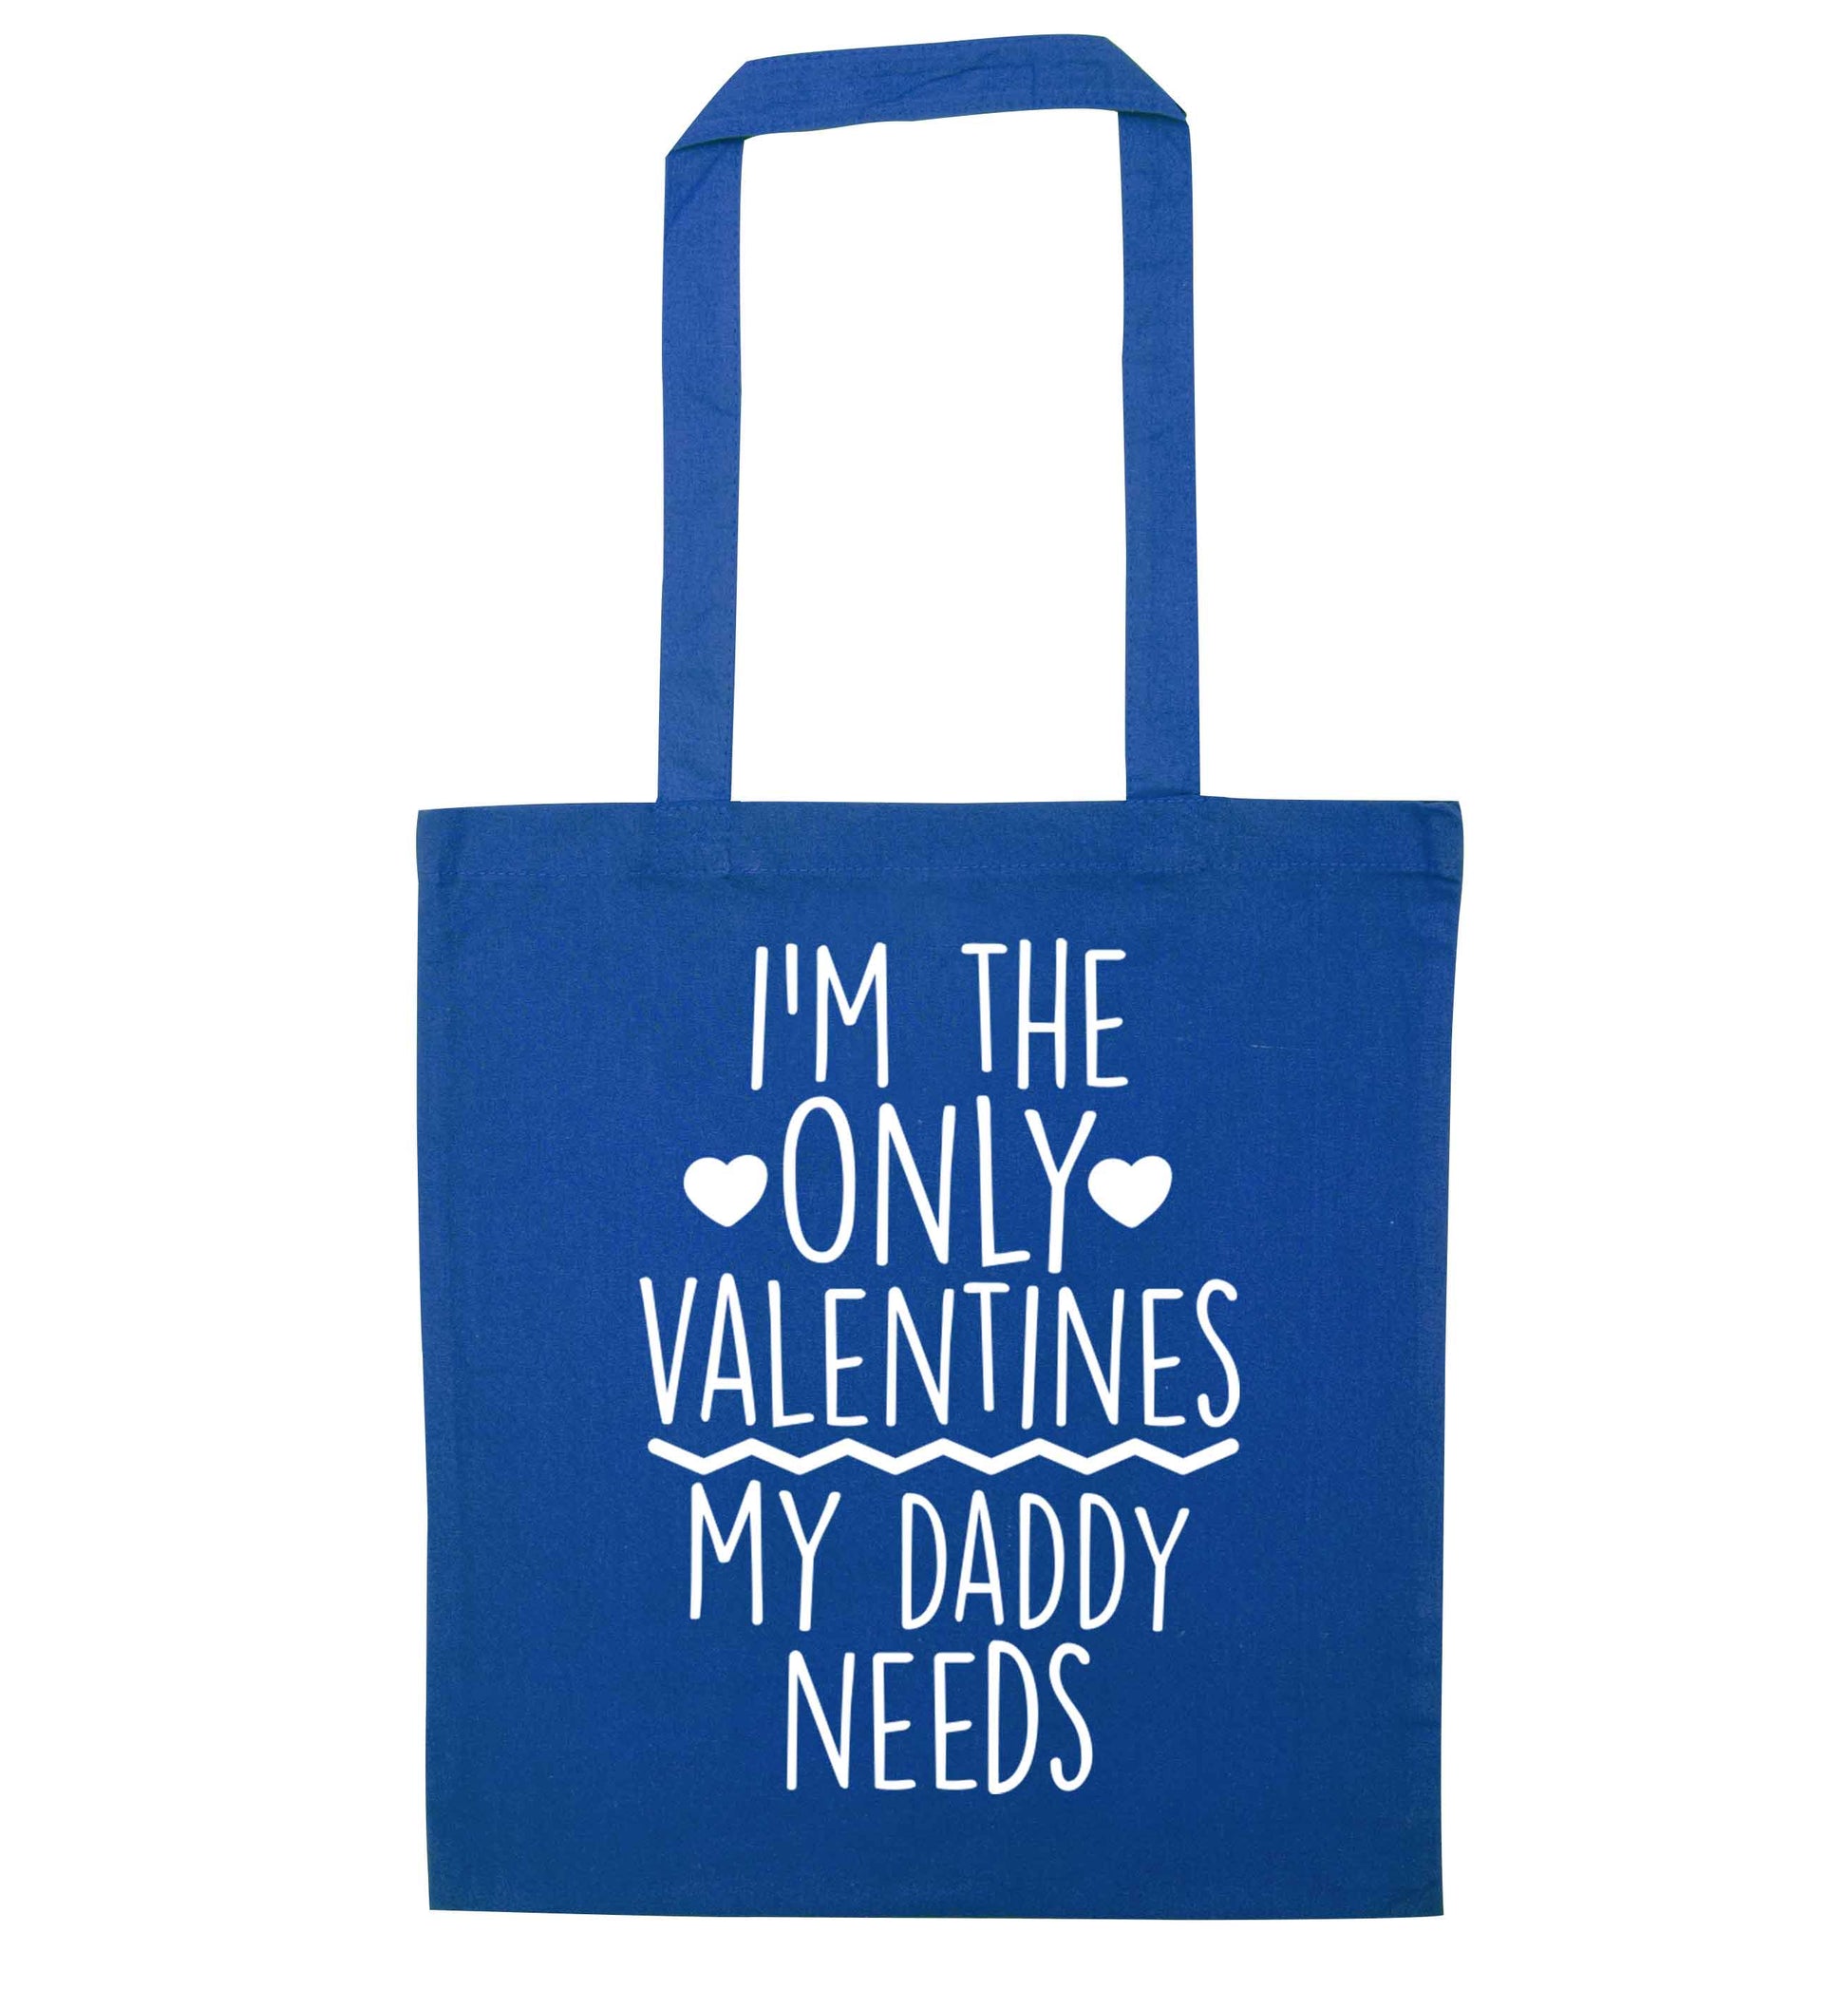 I'm the only valentines my daddy needs blue tote bag